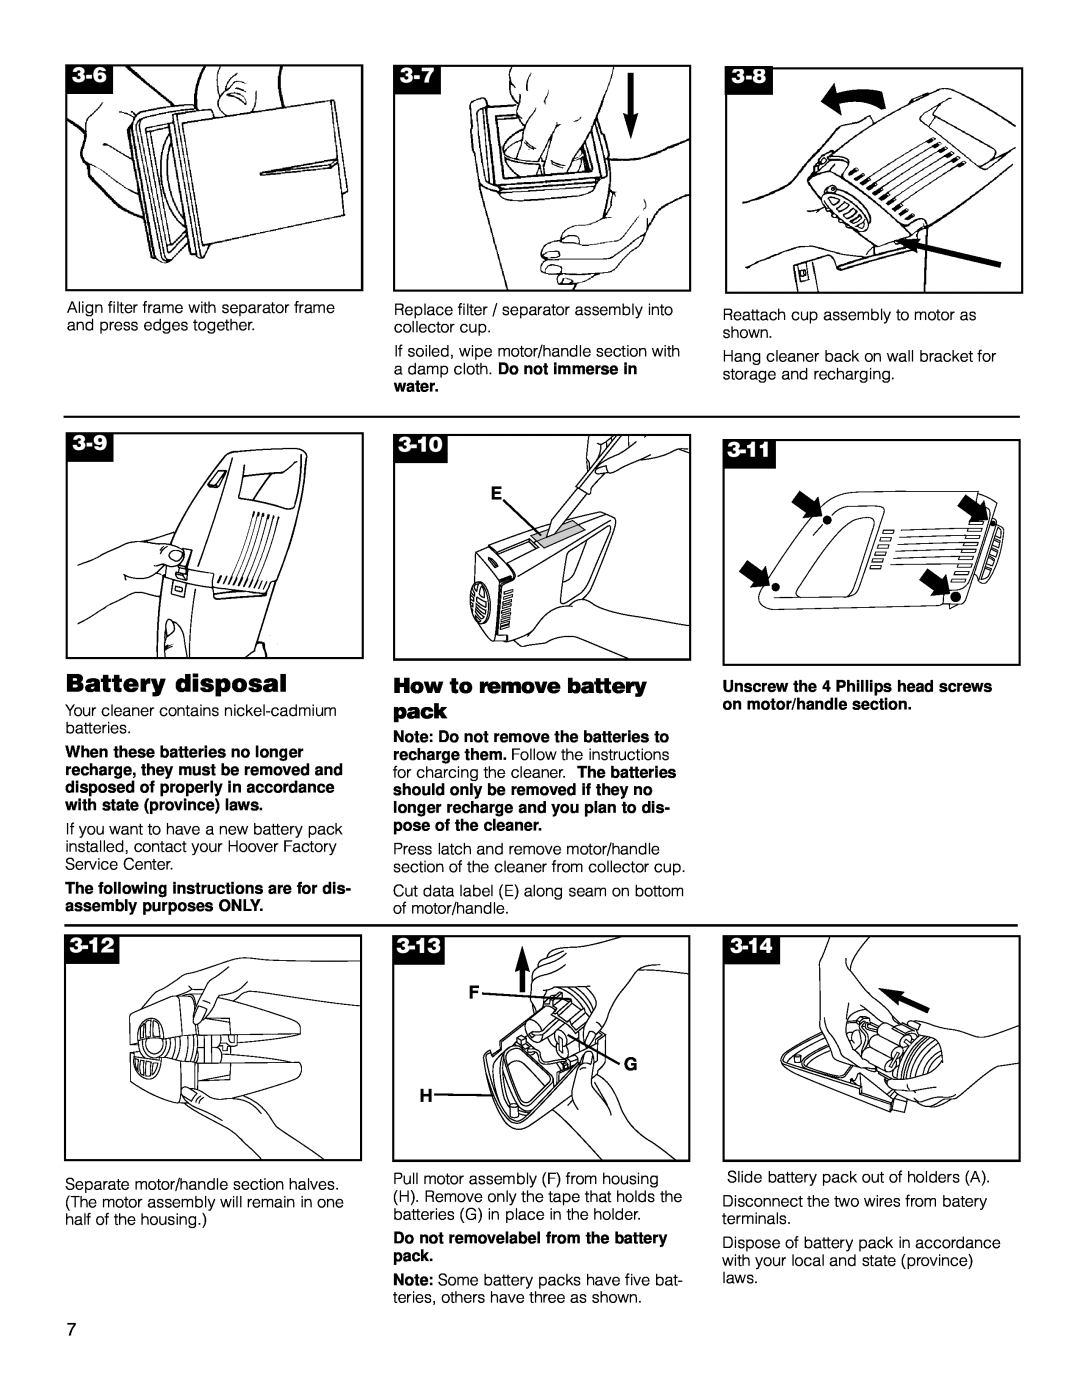 Hoover Dubl-Duty owner manual Battery disposal, 3-10, 3-11, How to remove battery pack, 3-12, 3-13, 3-14 